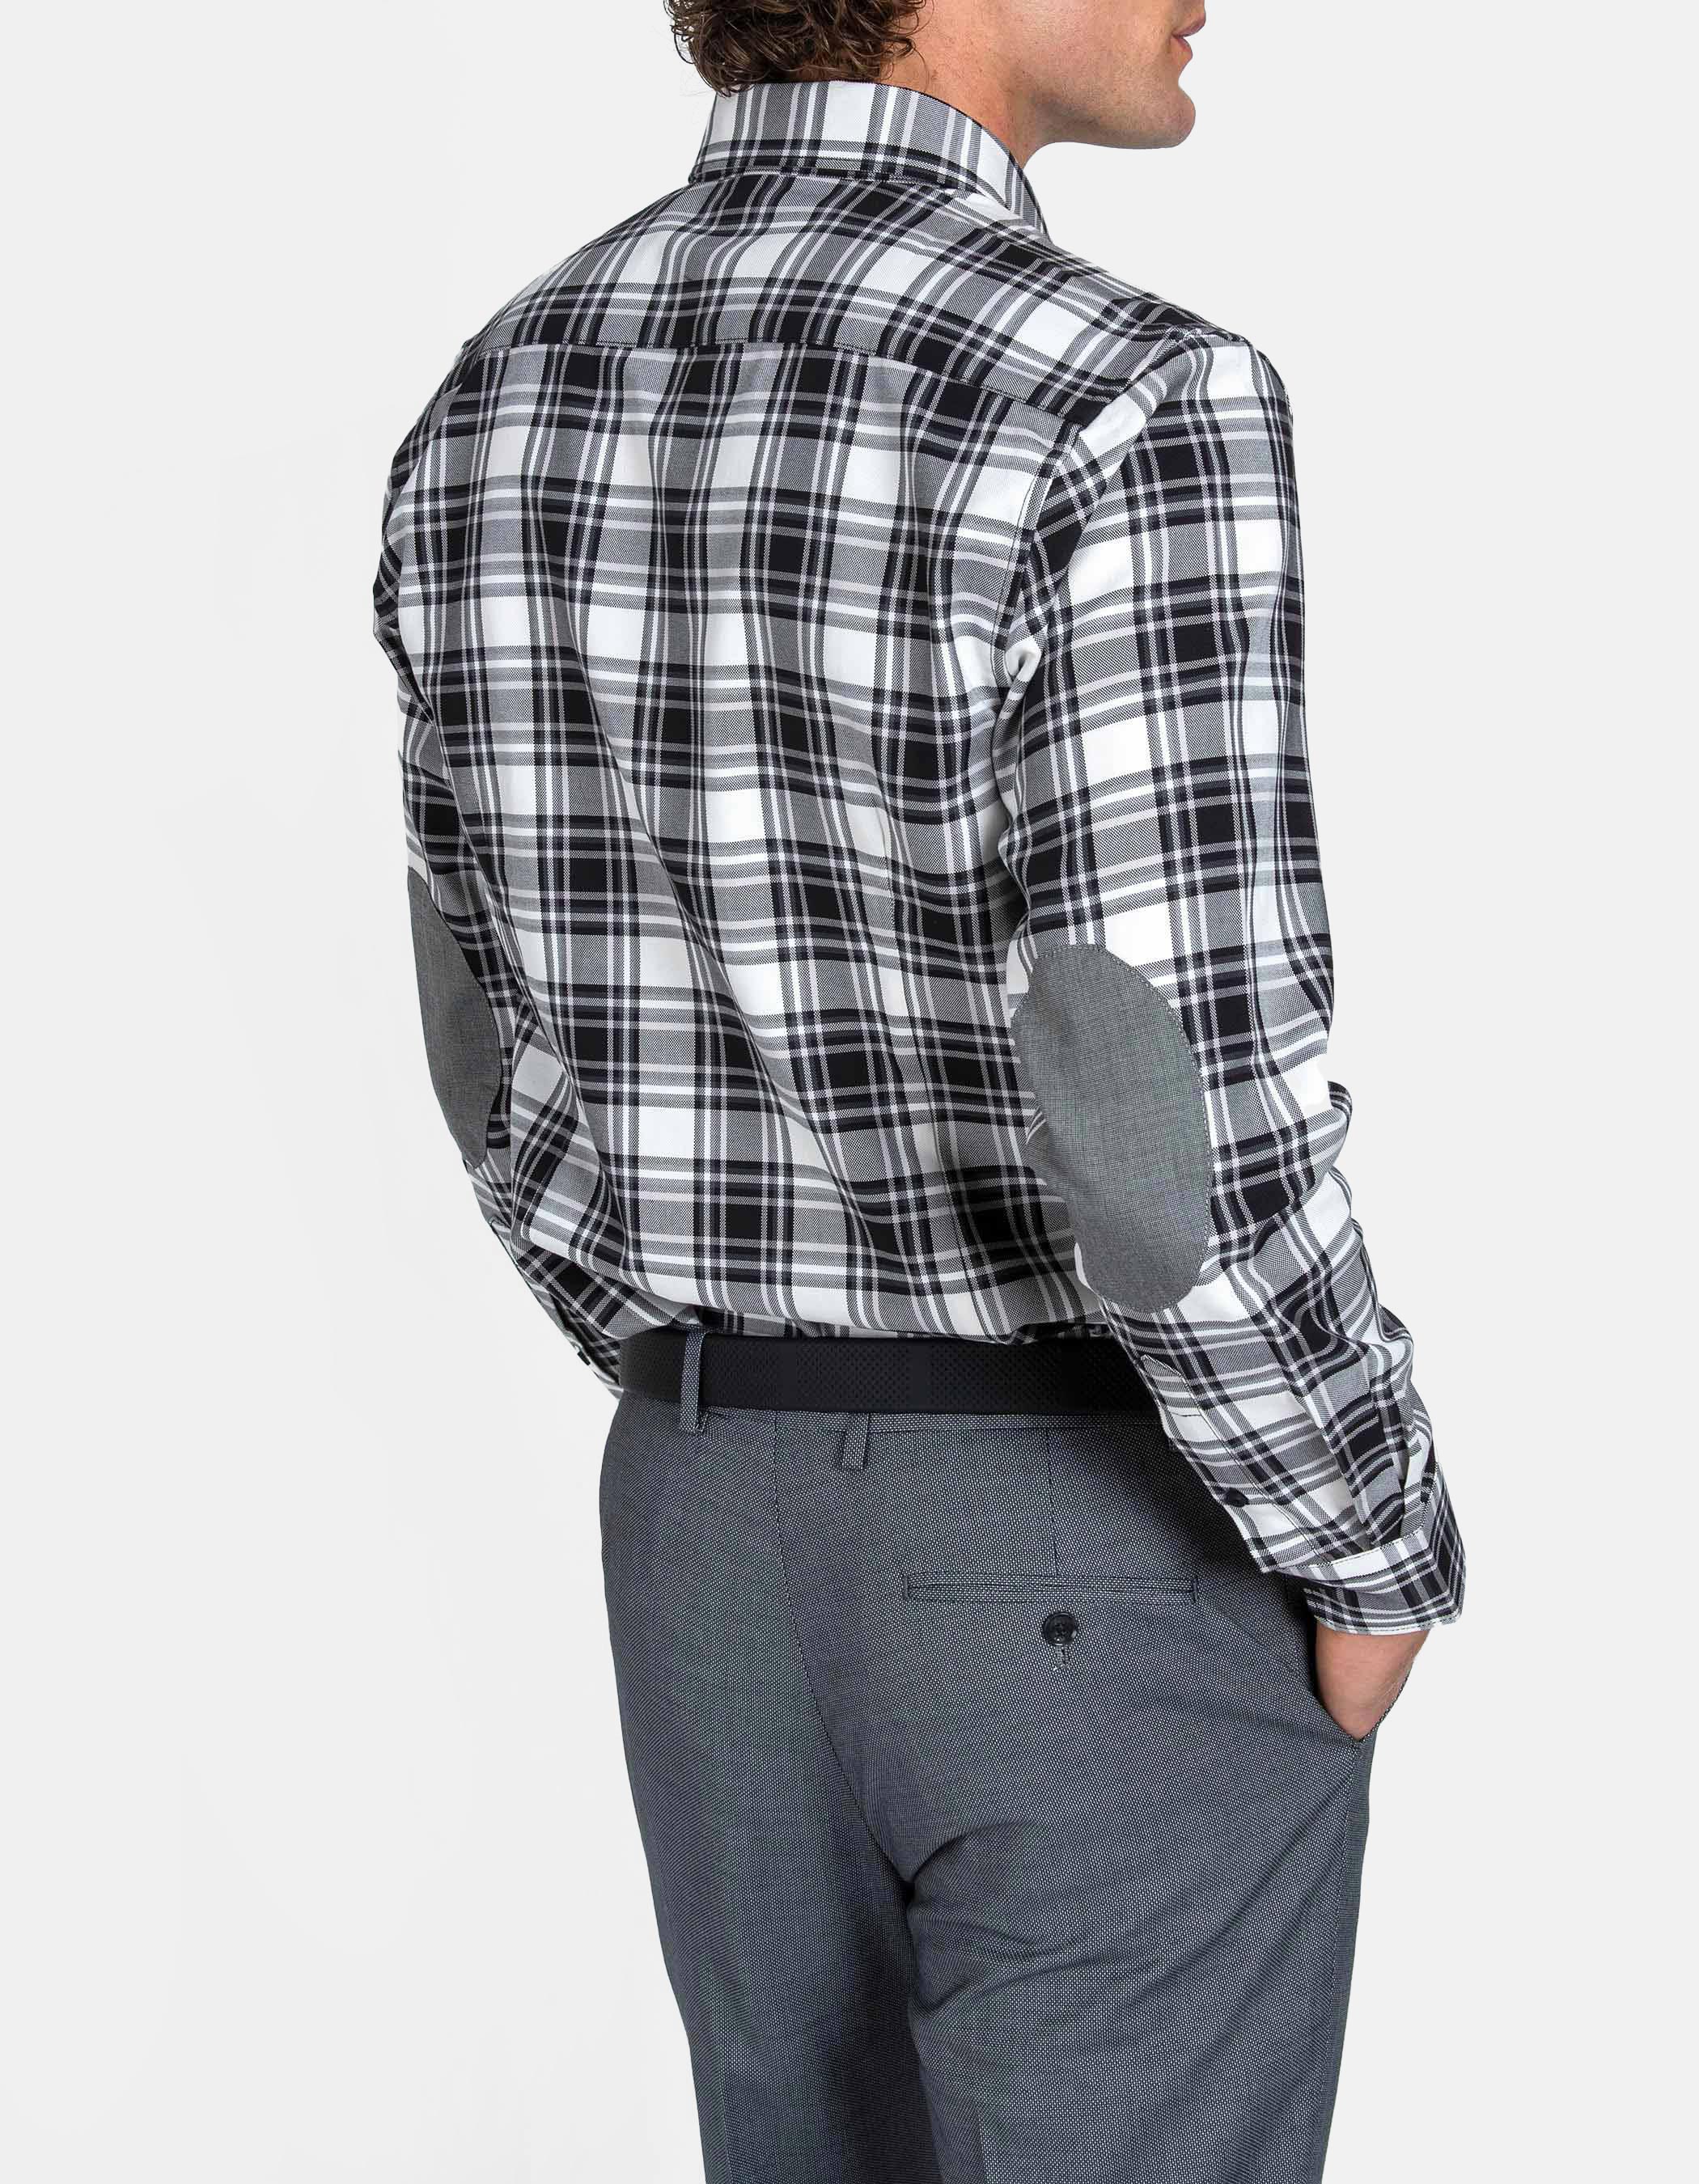 Checked shirt elbow patches 1